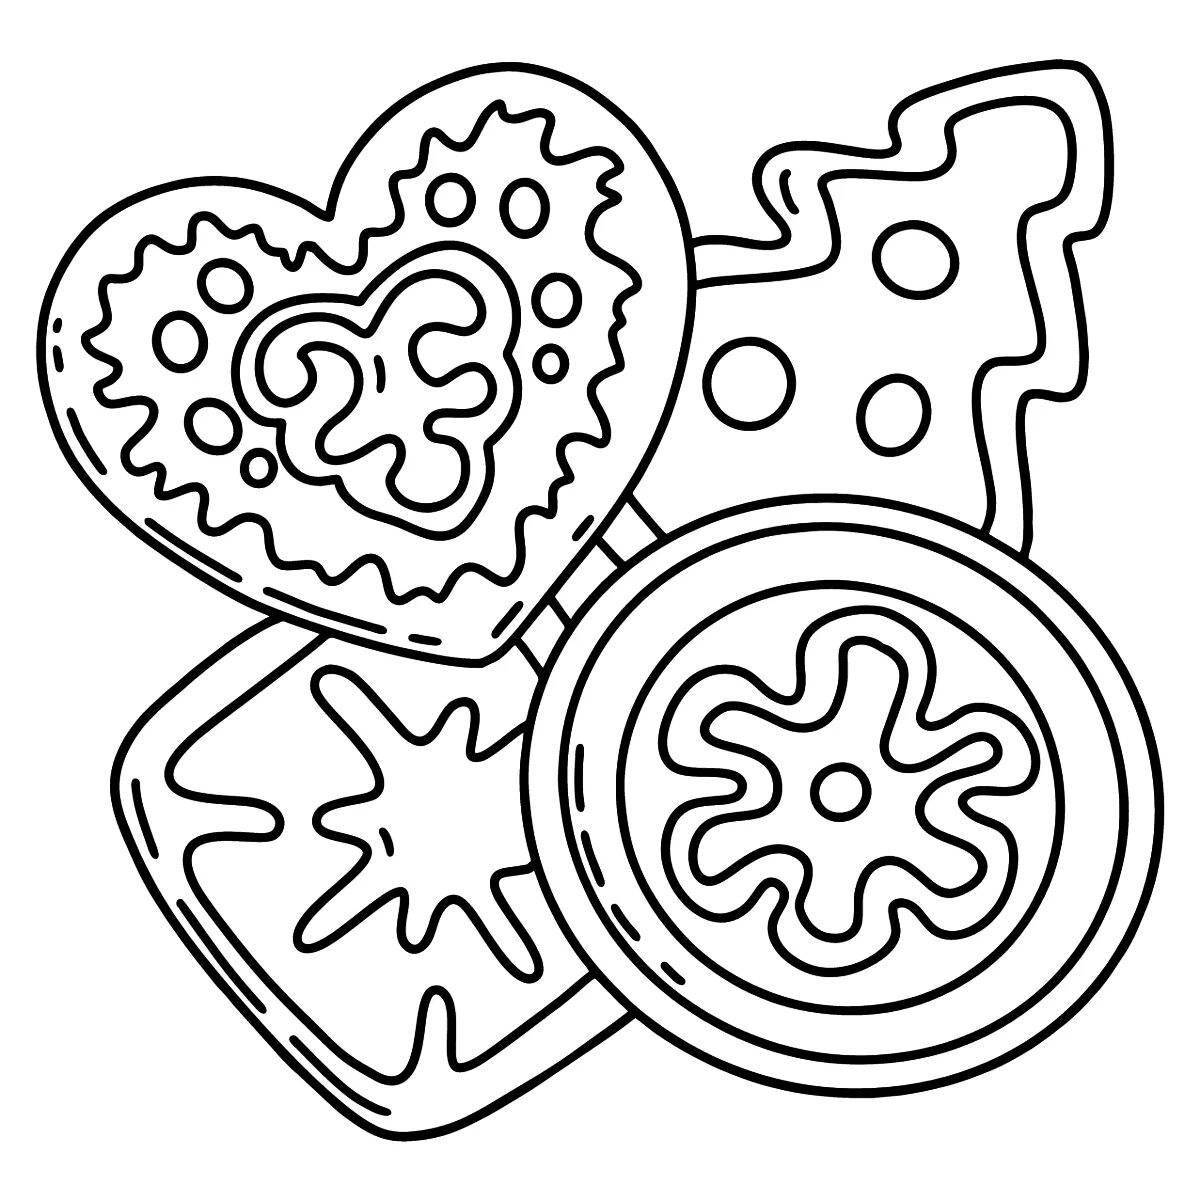 Coloring page holiday cookies